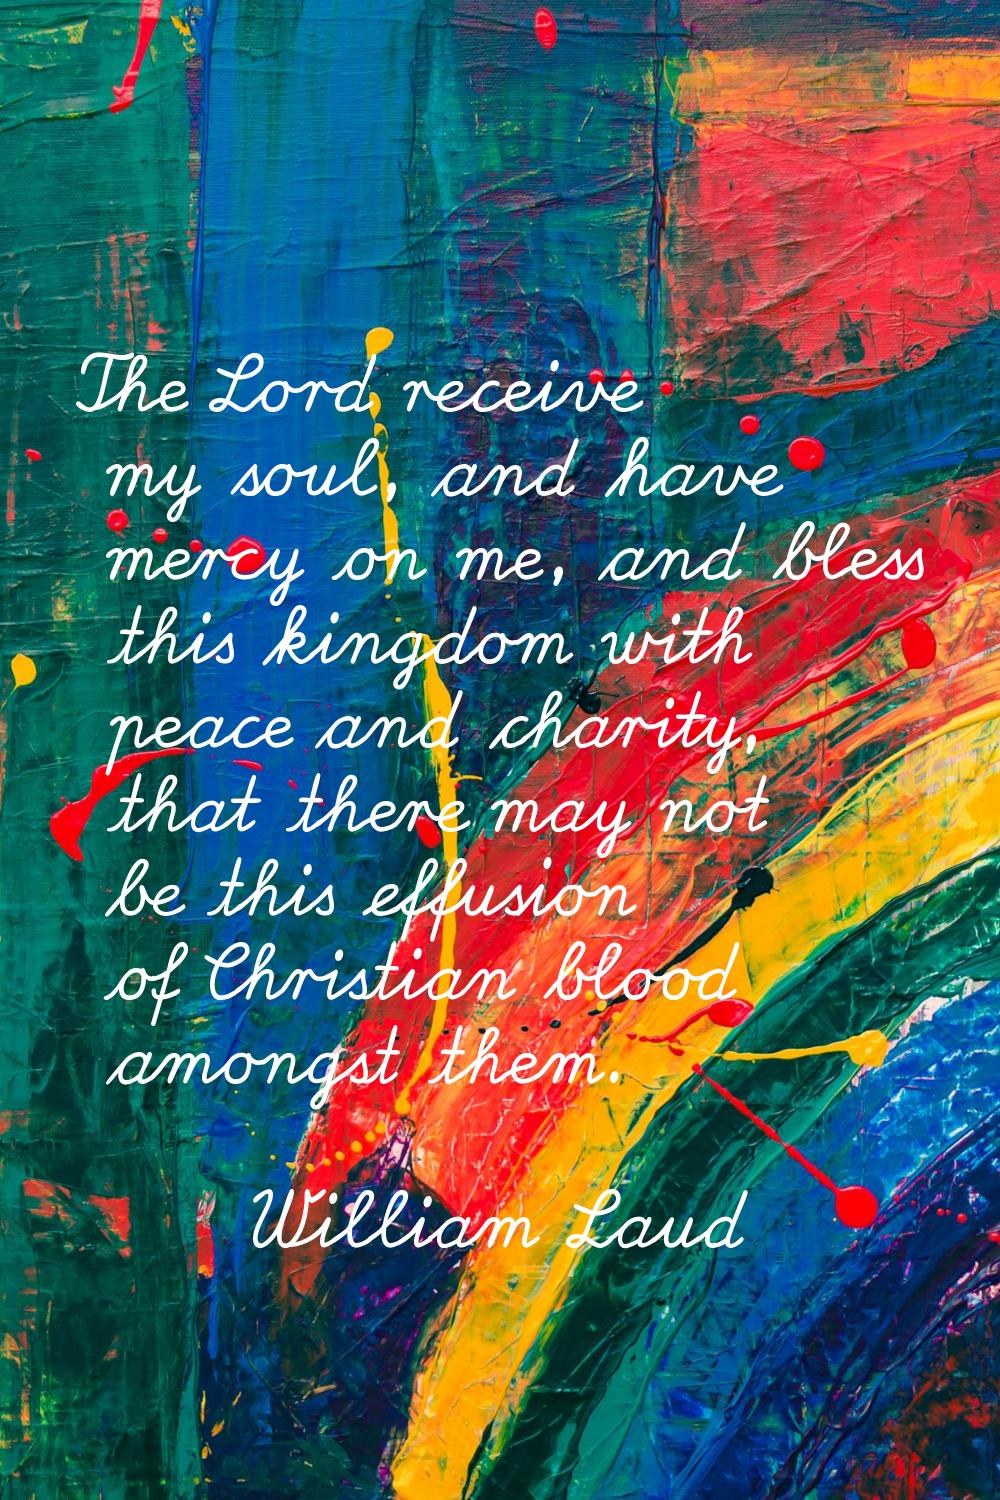 The Lord receive my soul, and have mercy on me, and bless this kingdom with peace and charity, that